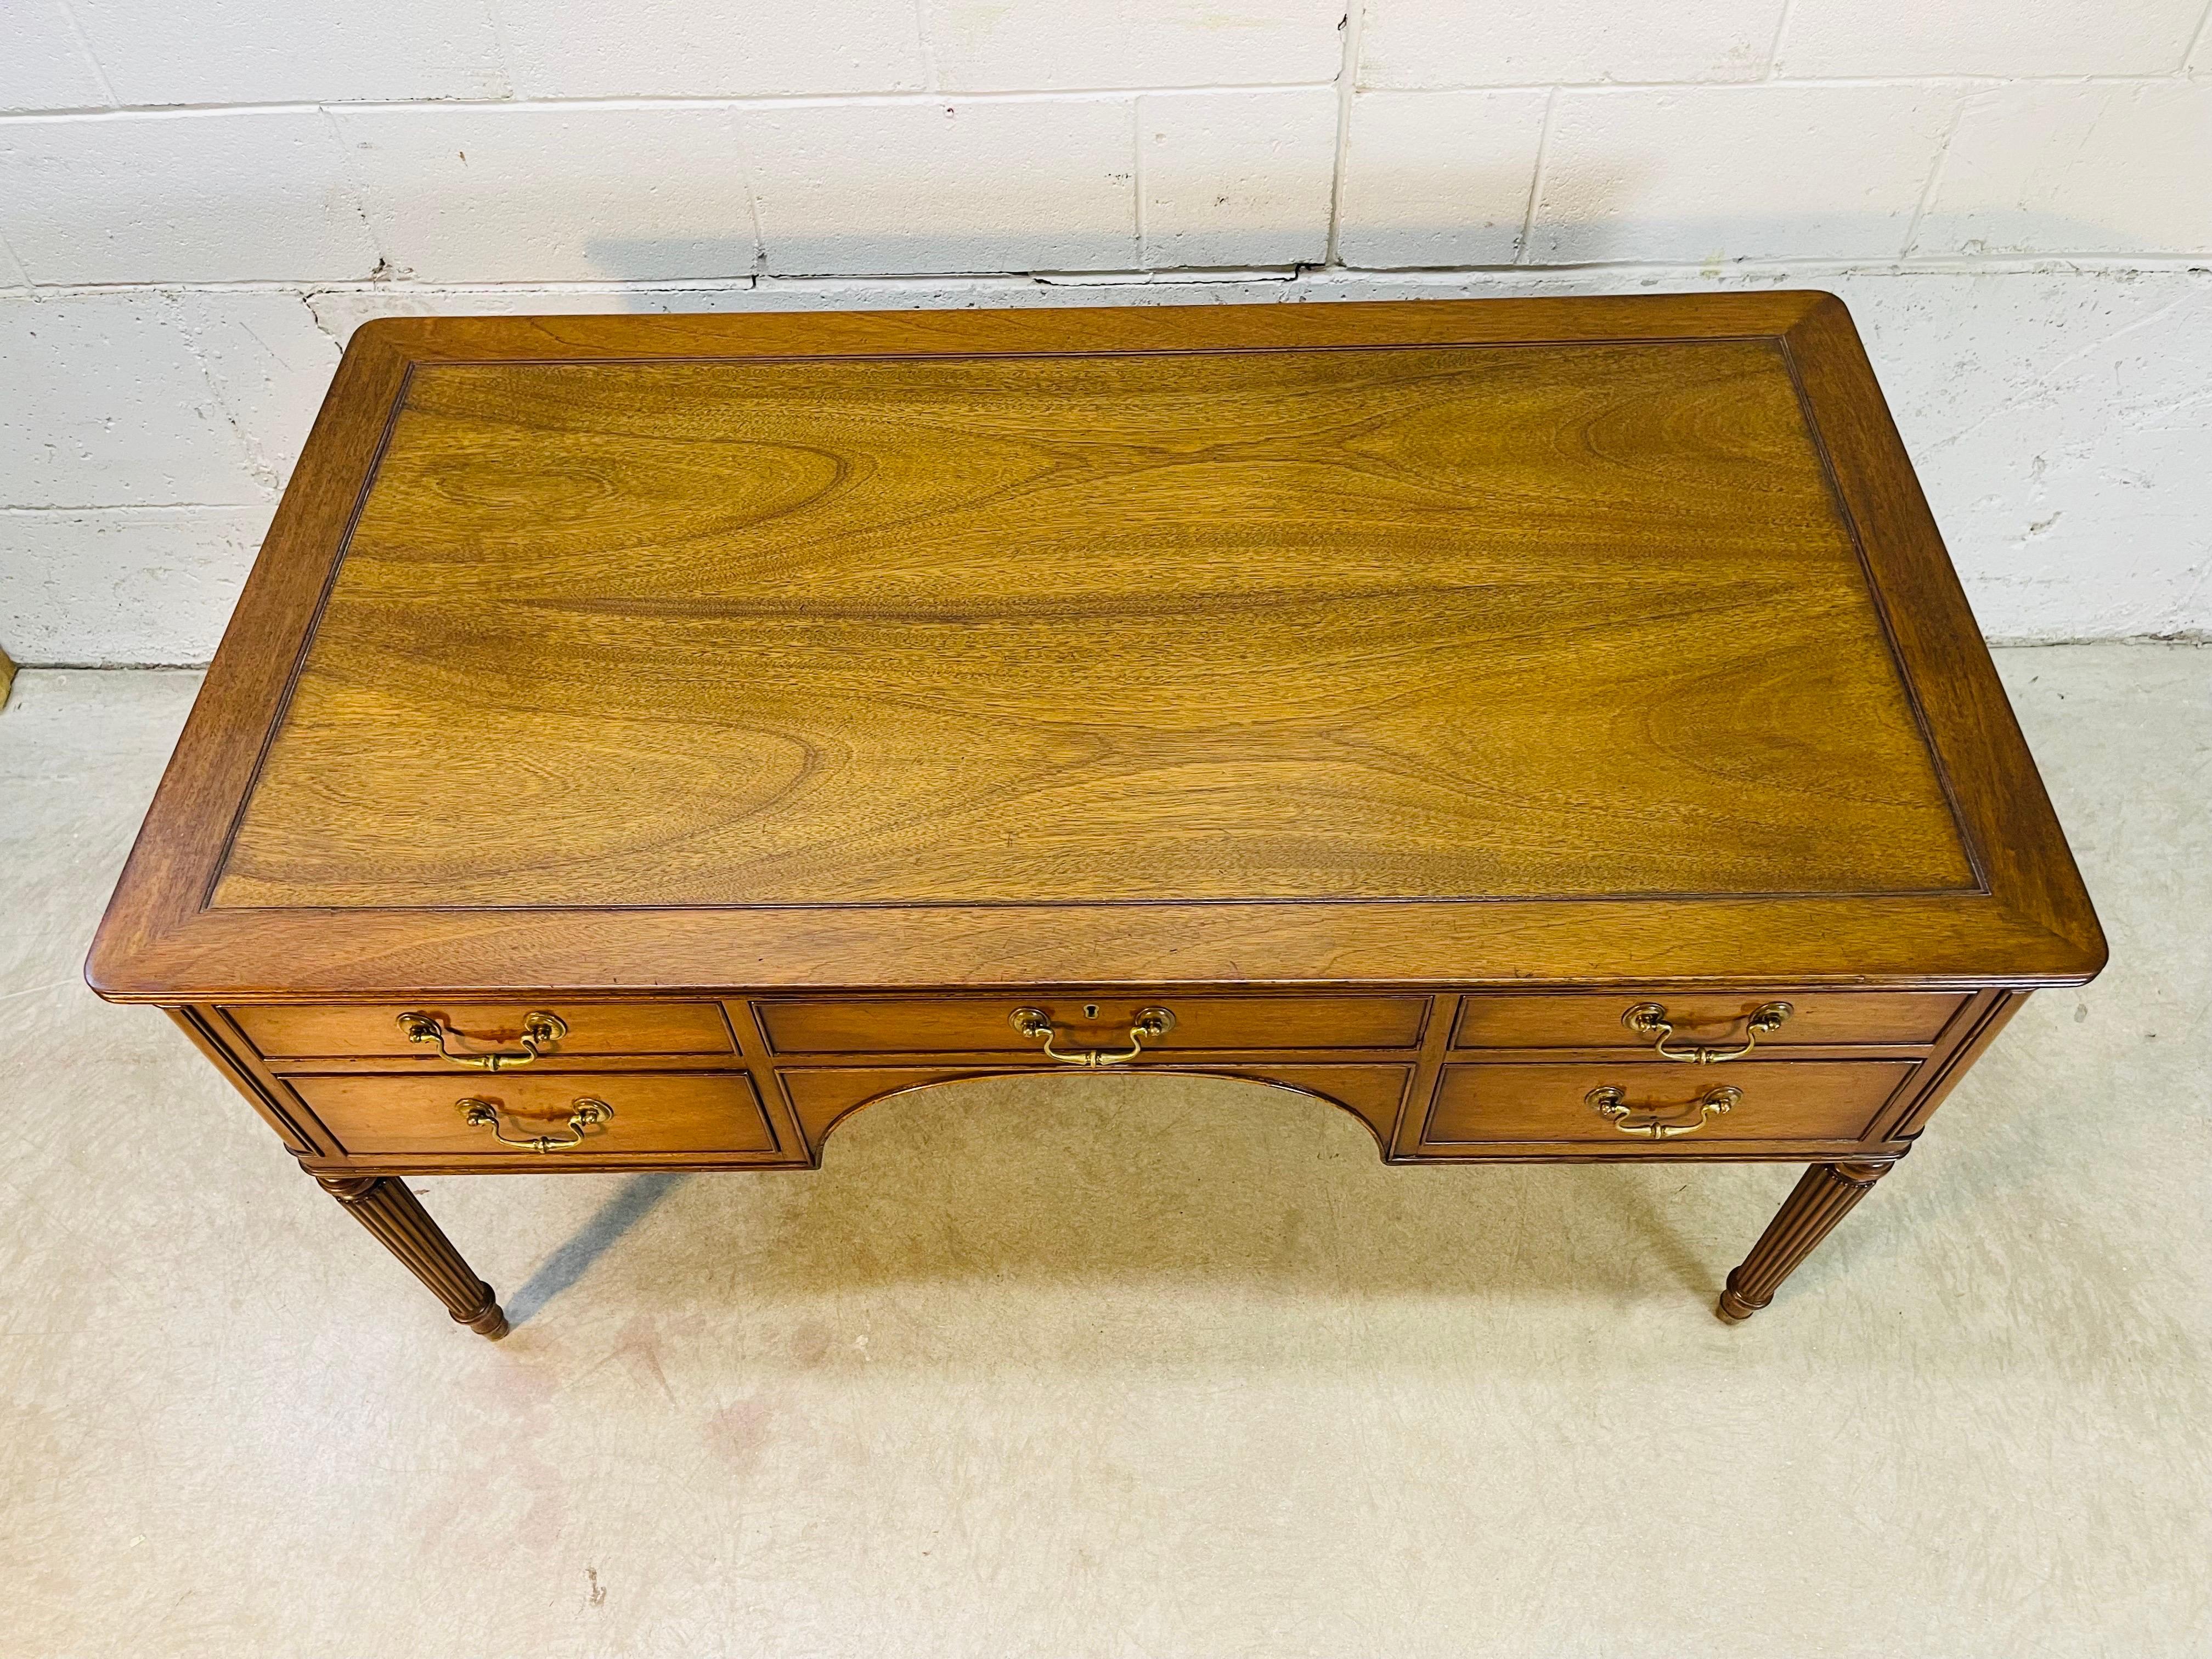 English Neoclassical Sheraton Style Mahogany Desk by Kittinger In Good Condition For Sale In Amherst, NH